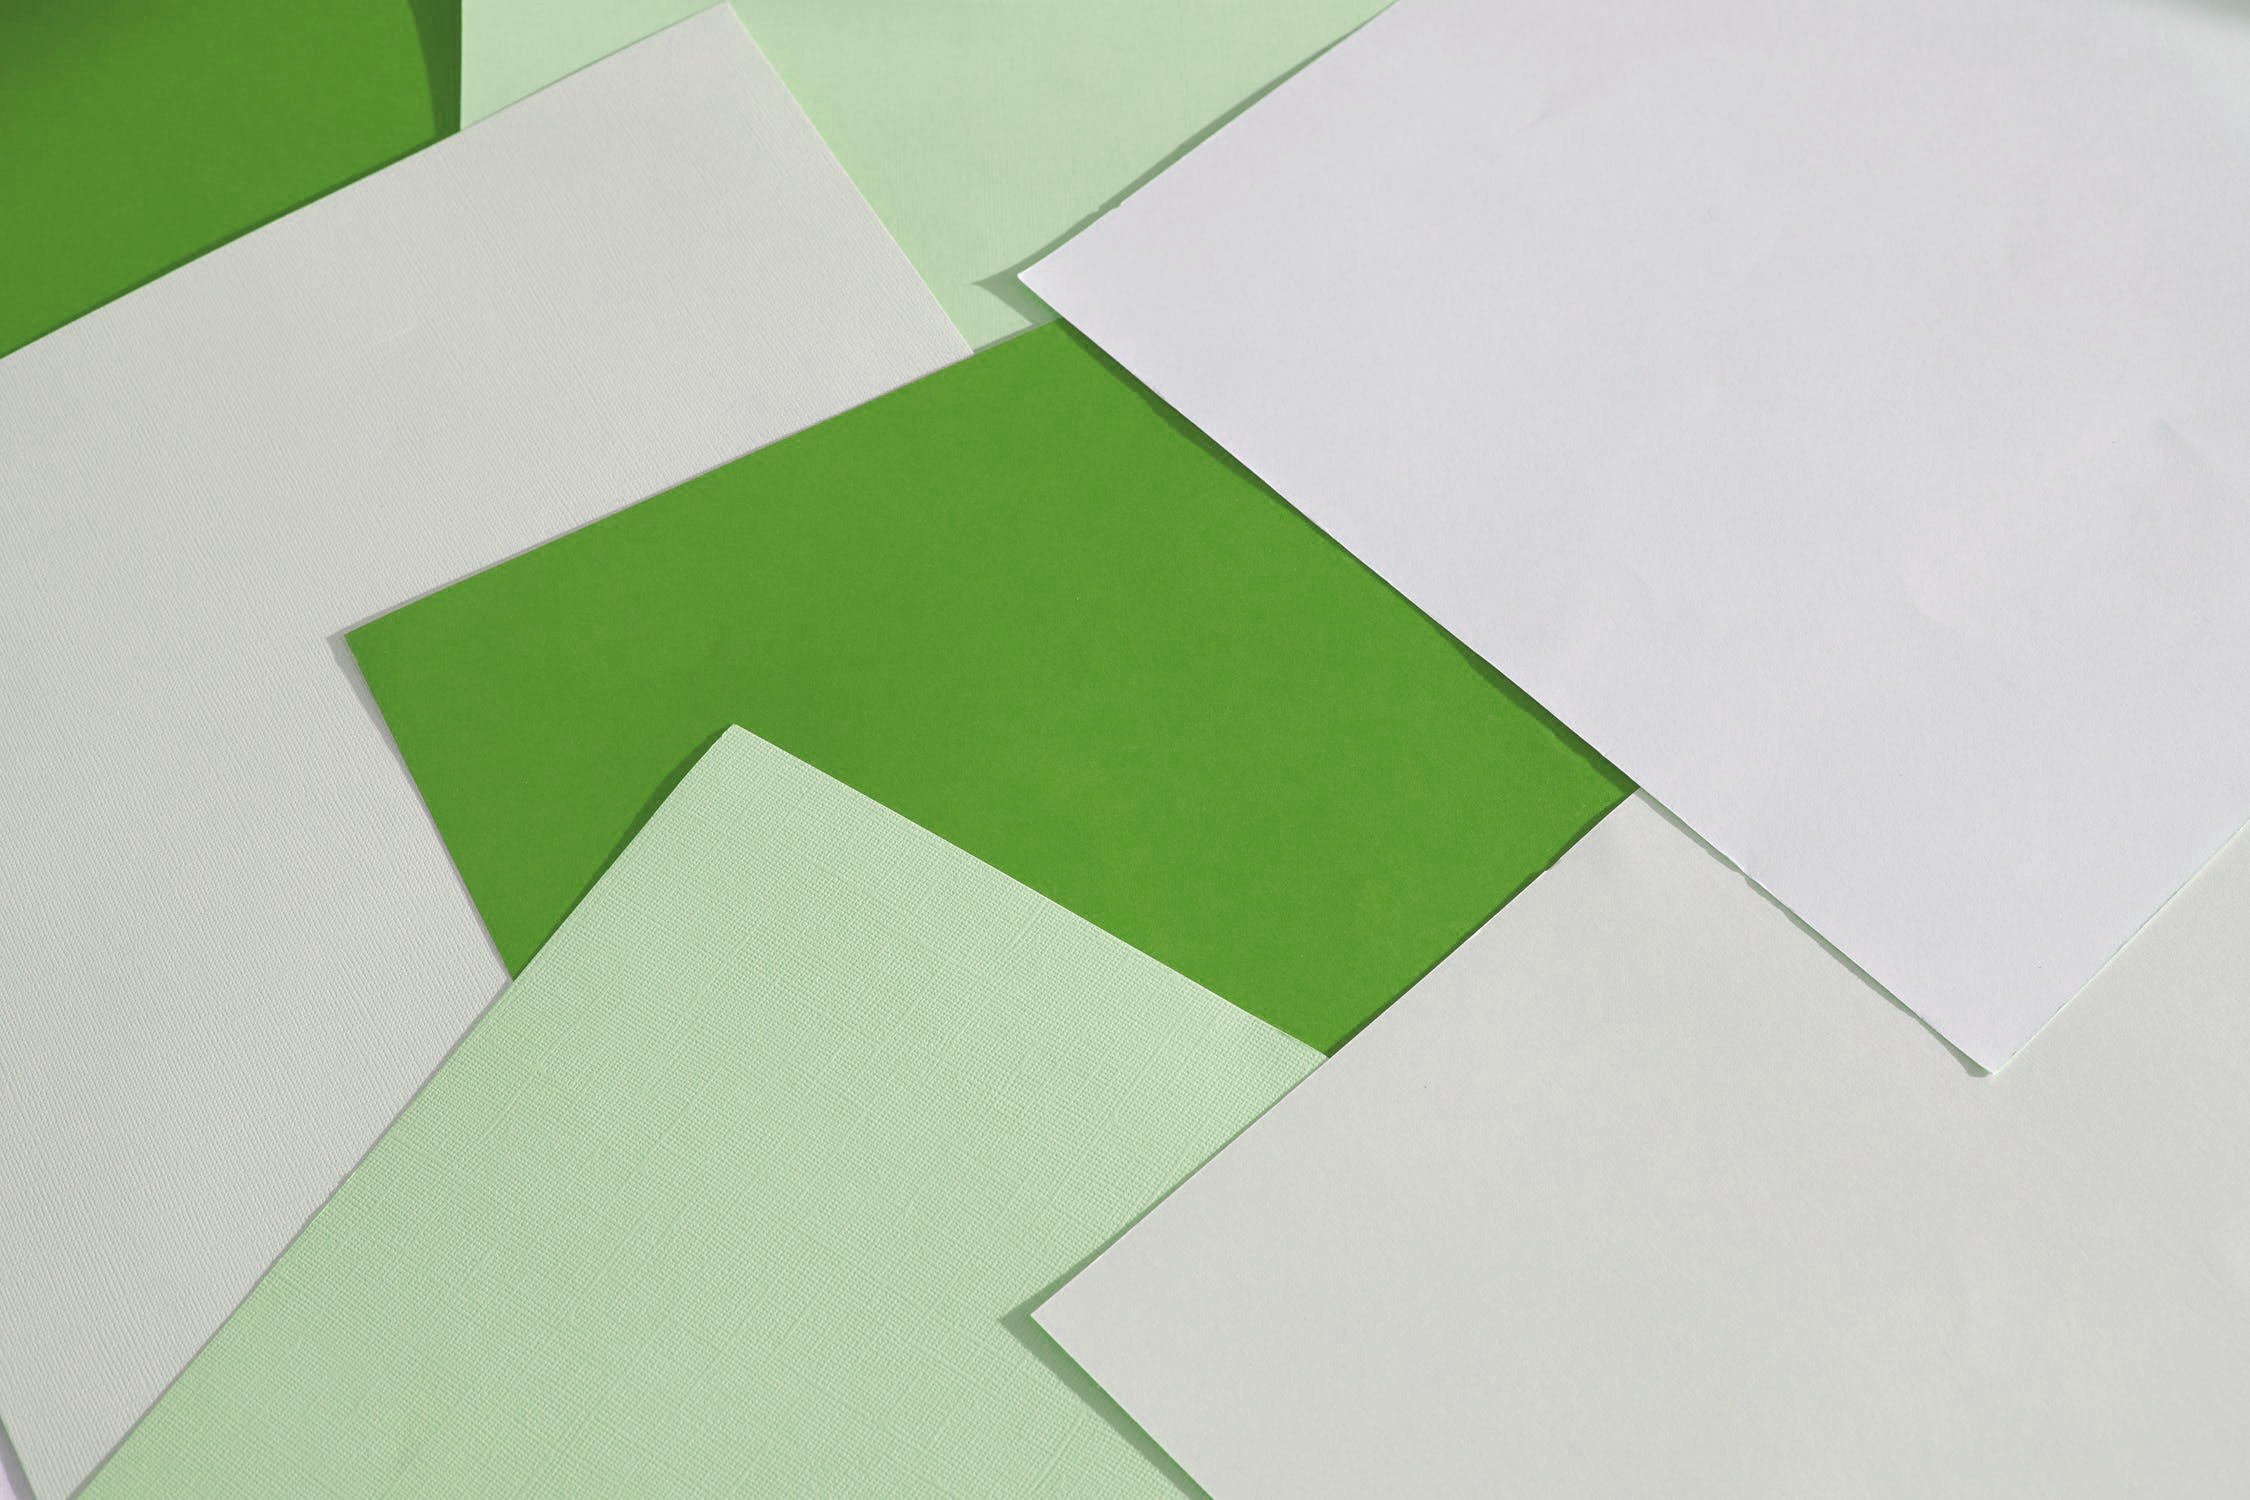 Image of paper stacking to visualize the concepts of Material Design.